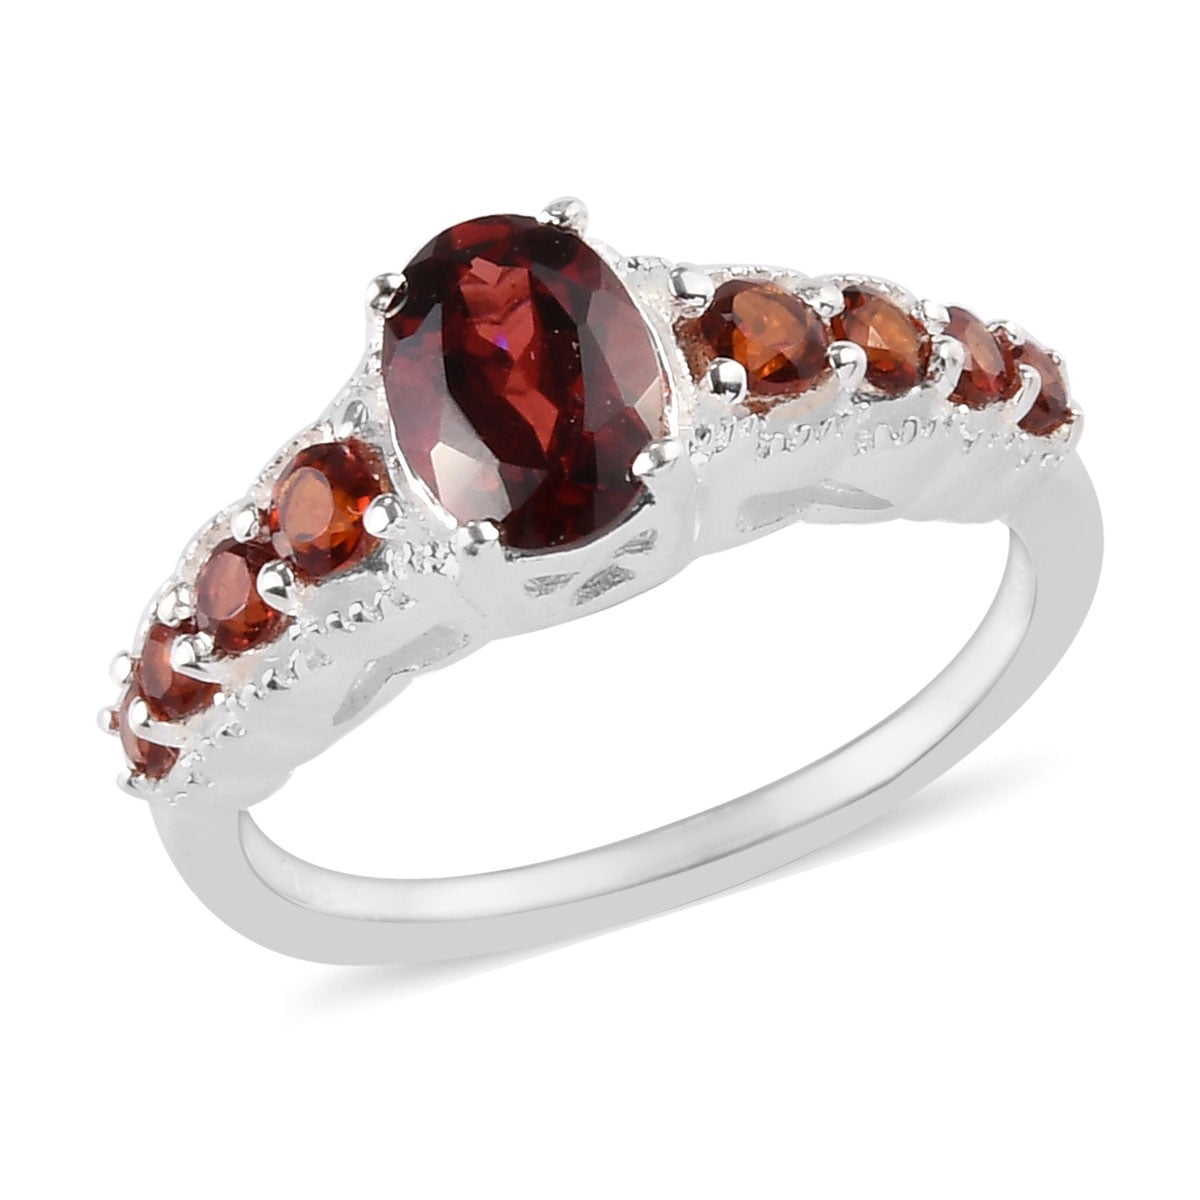 Genuine Garnet 925 Silver Ring For Men Cat Style Marquise Birthstone January Size 4,5,6,7,8,9,10,11,12 